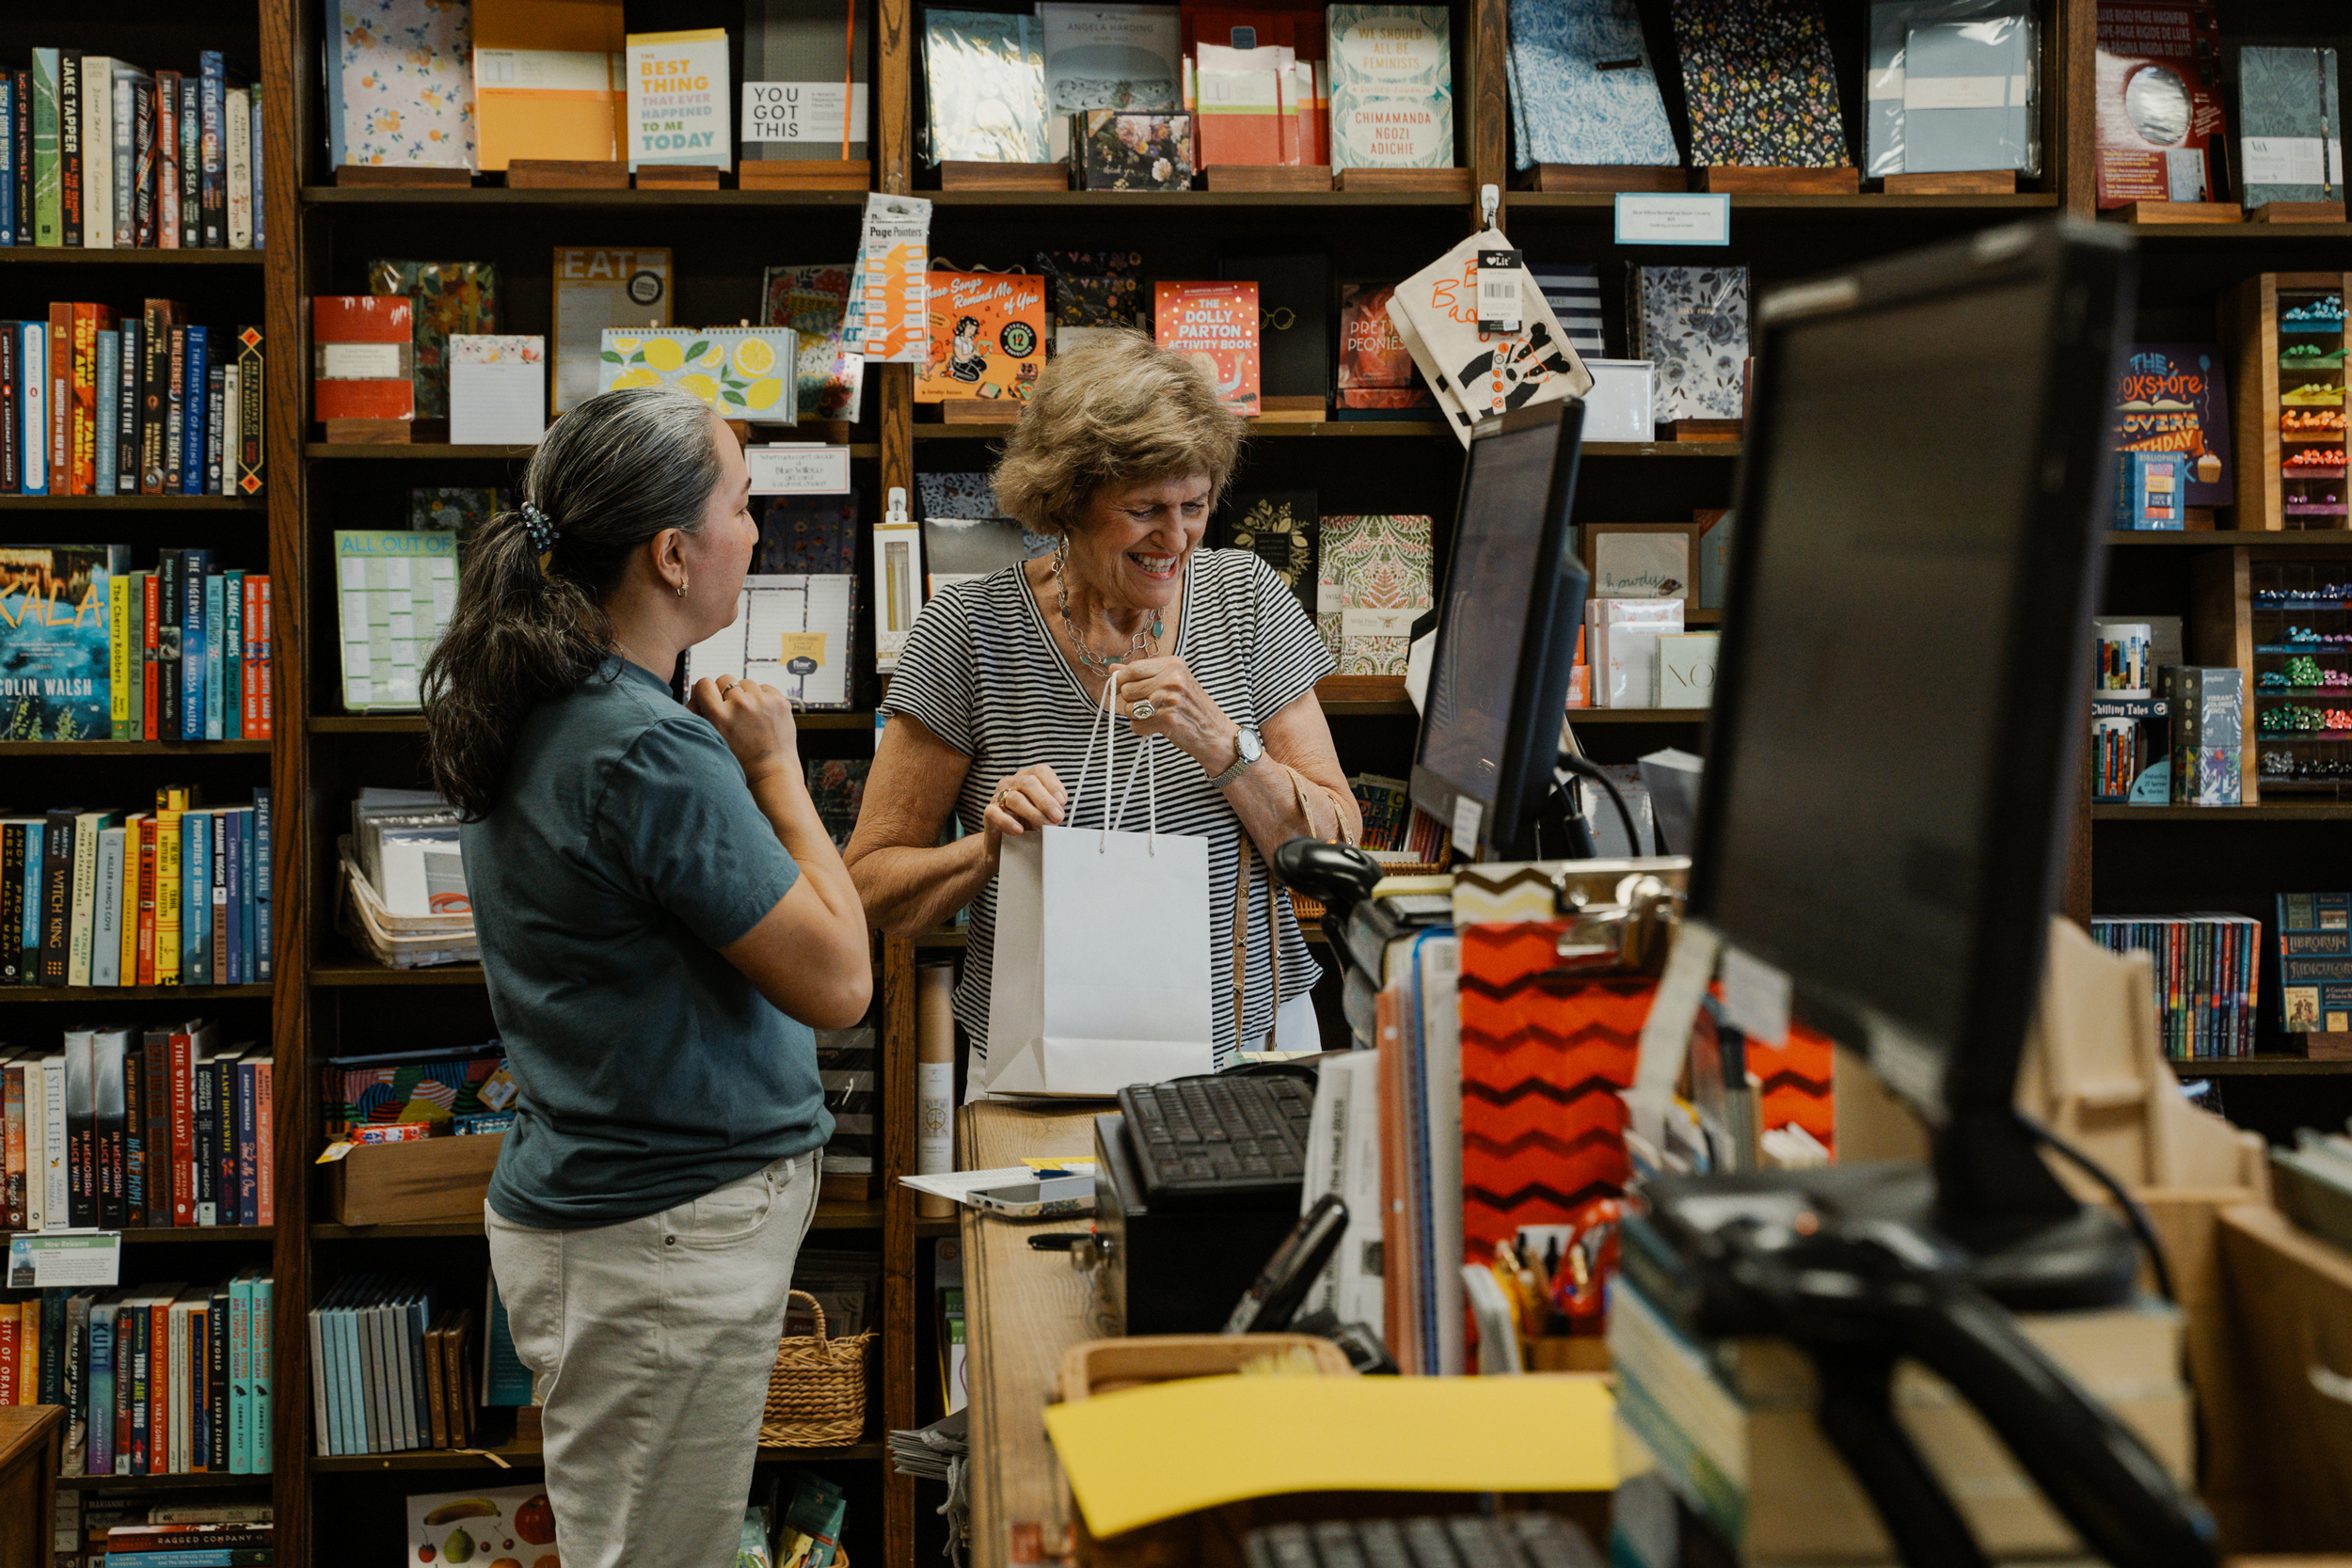 Aerie Brown, left, helps a customer with their purchases at Blue Willow Bookshop